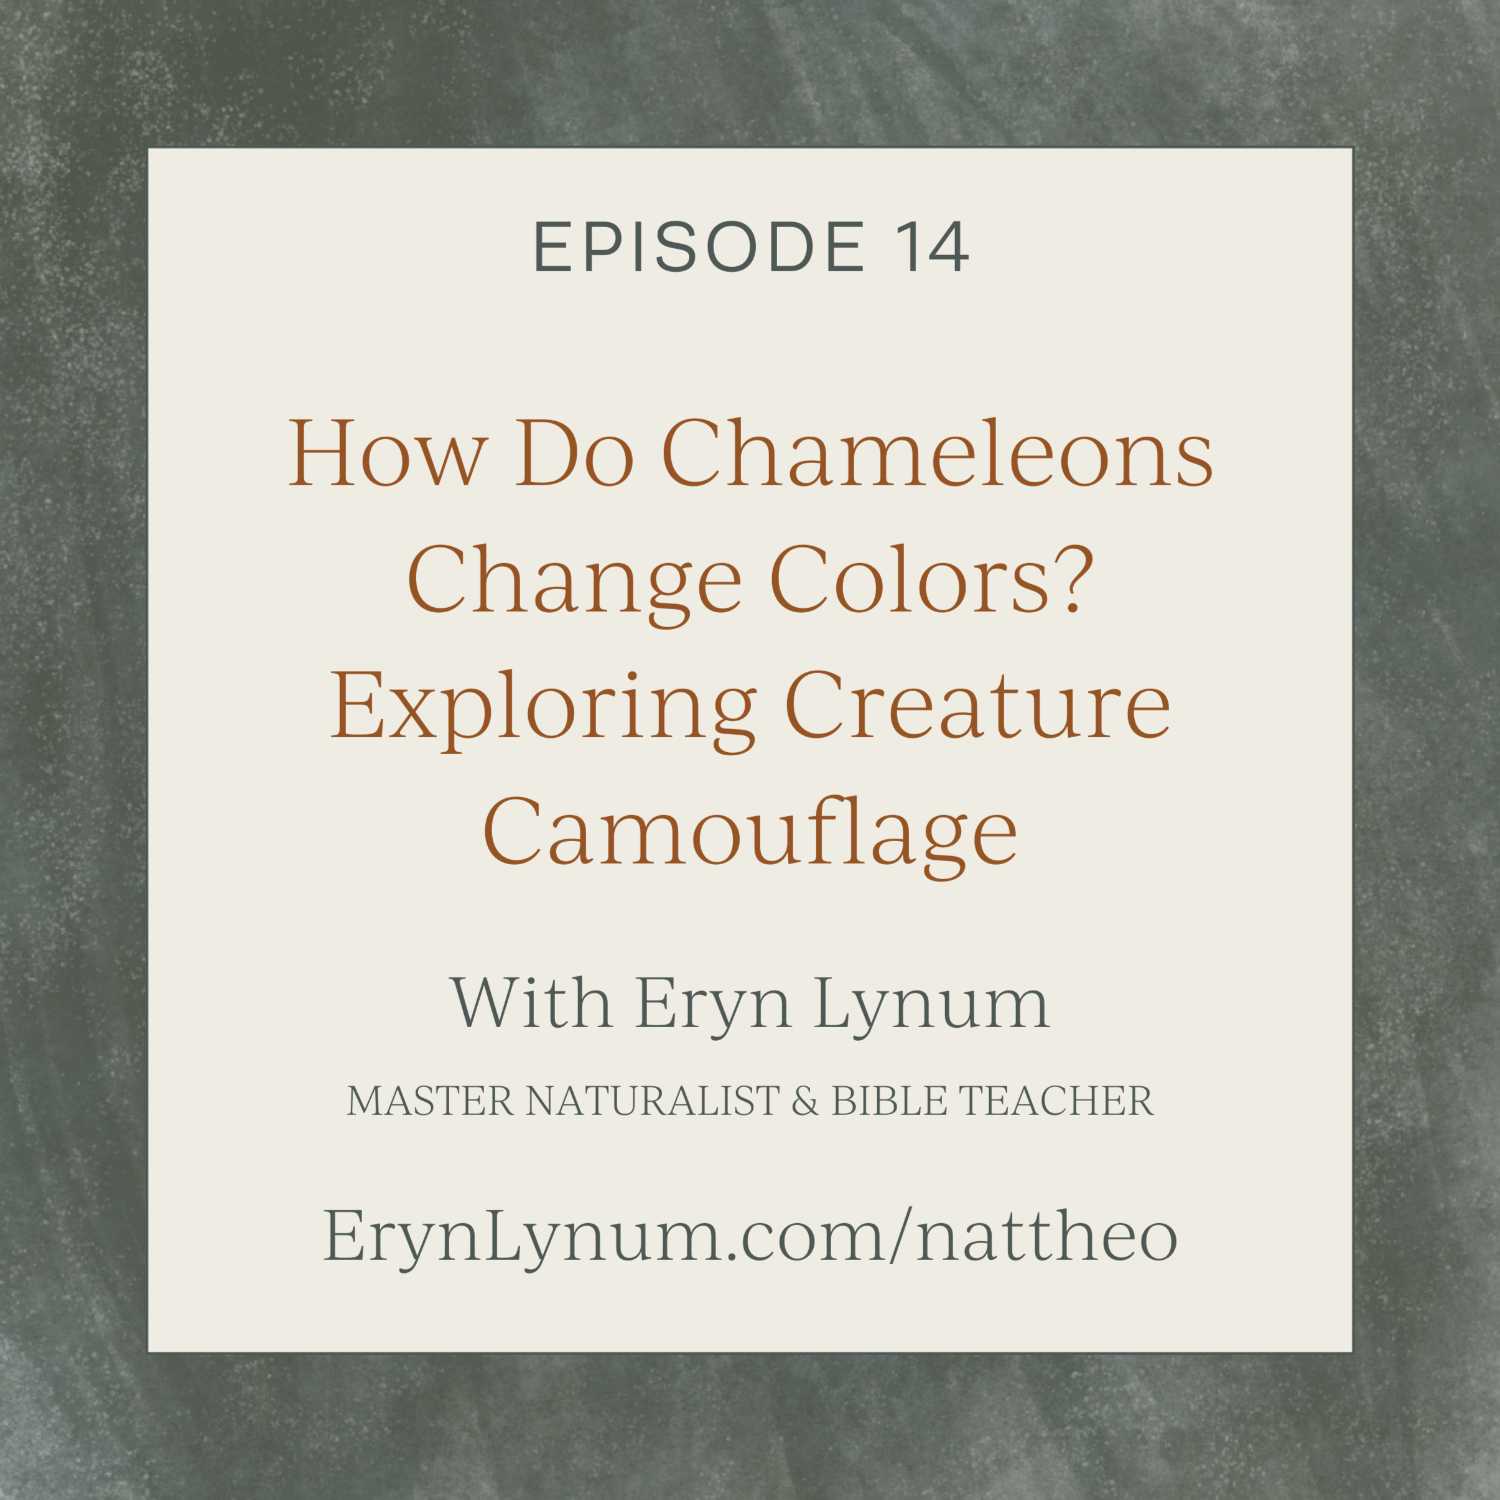 How Do Chameleons Change Colors? Exploring Creature Camouflage